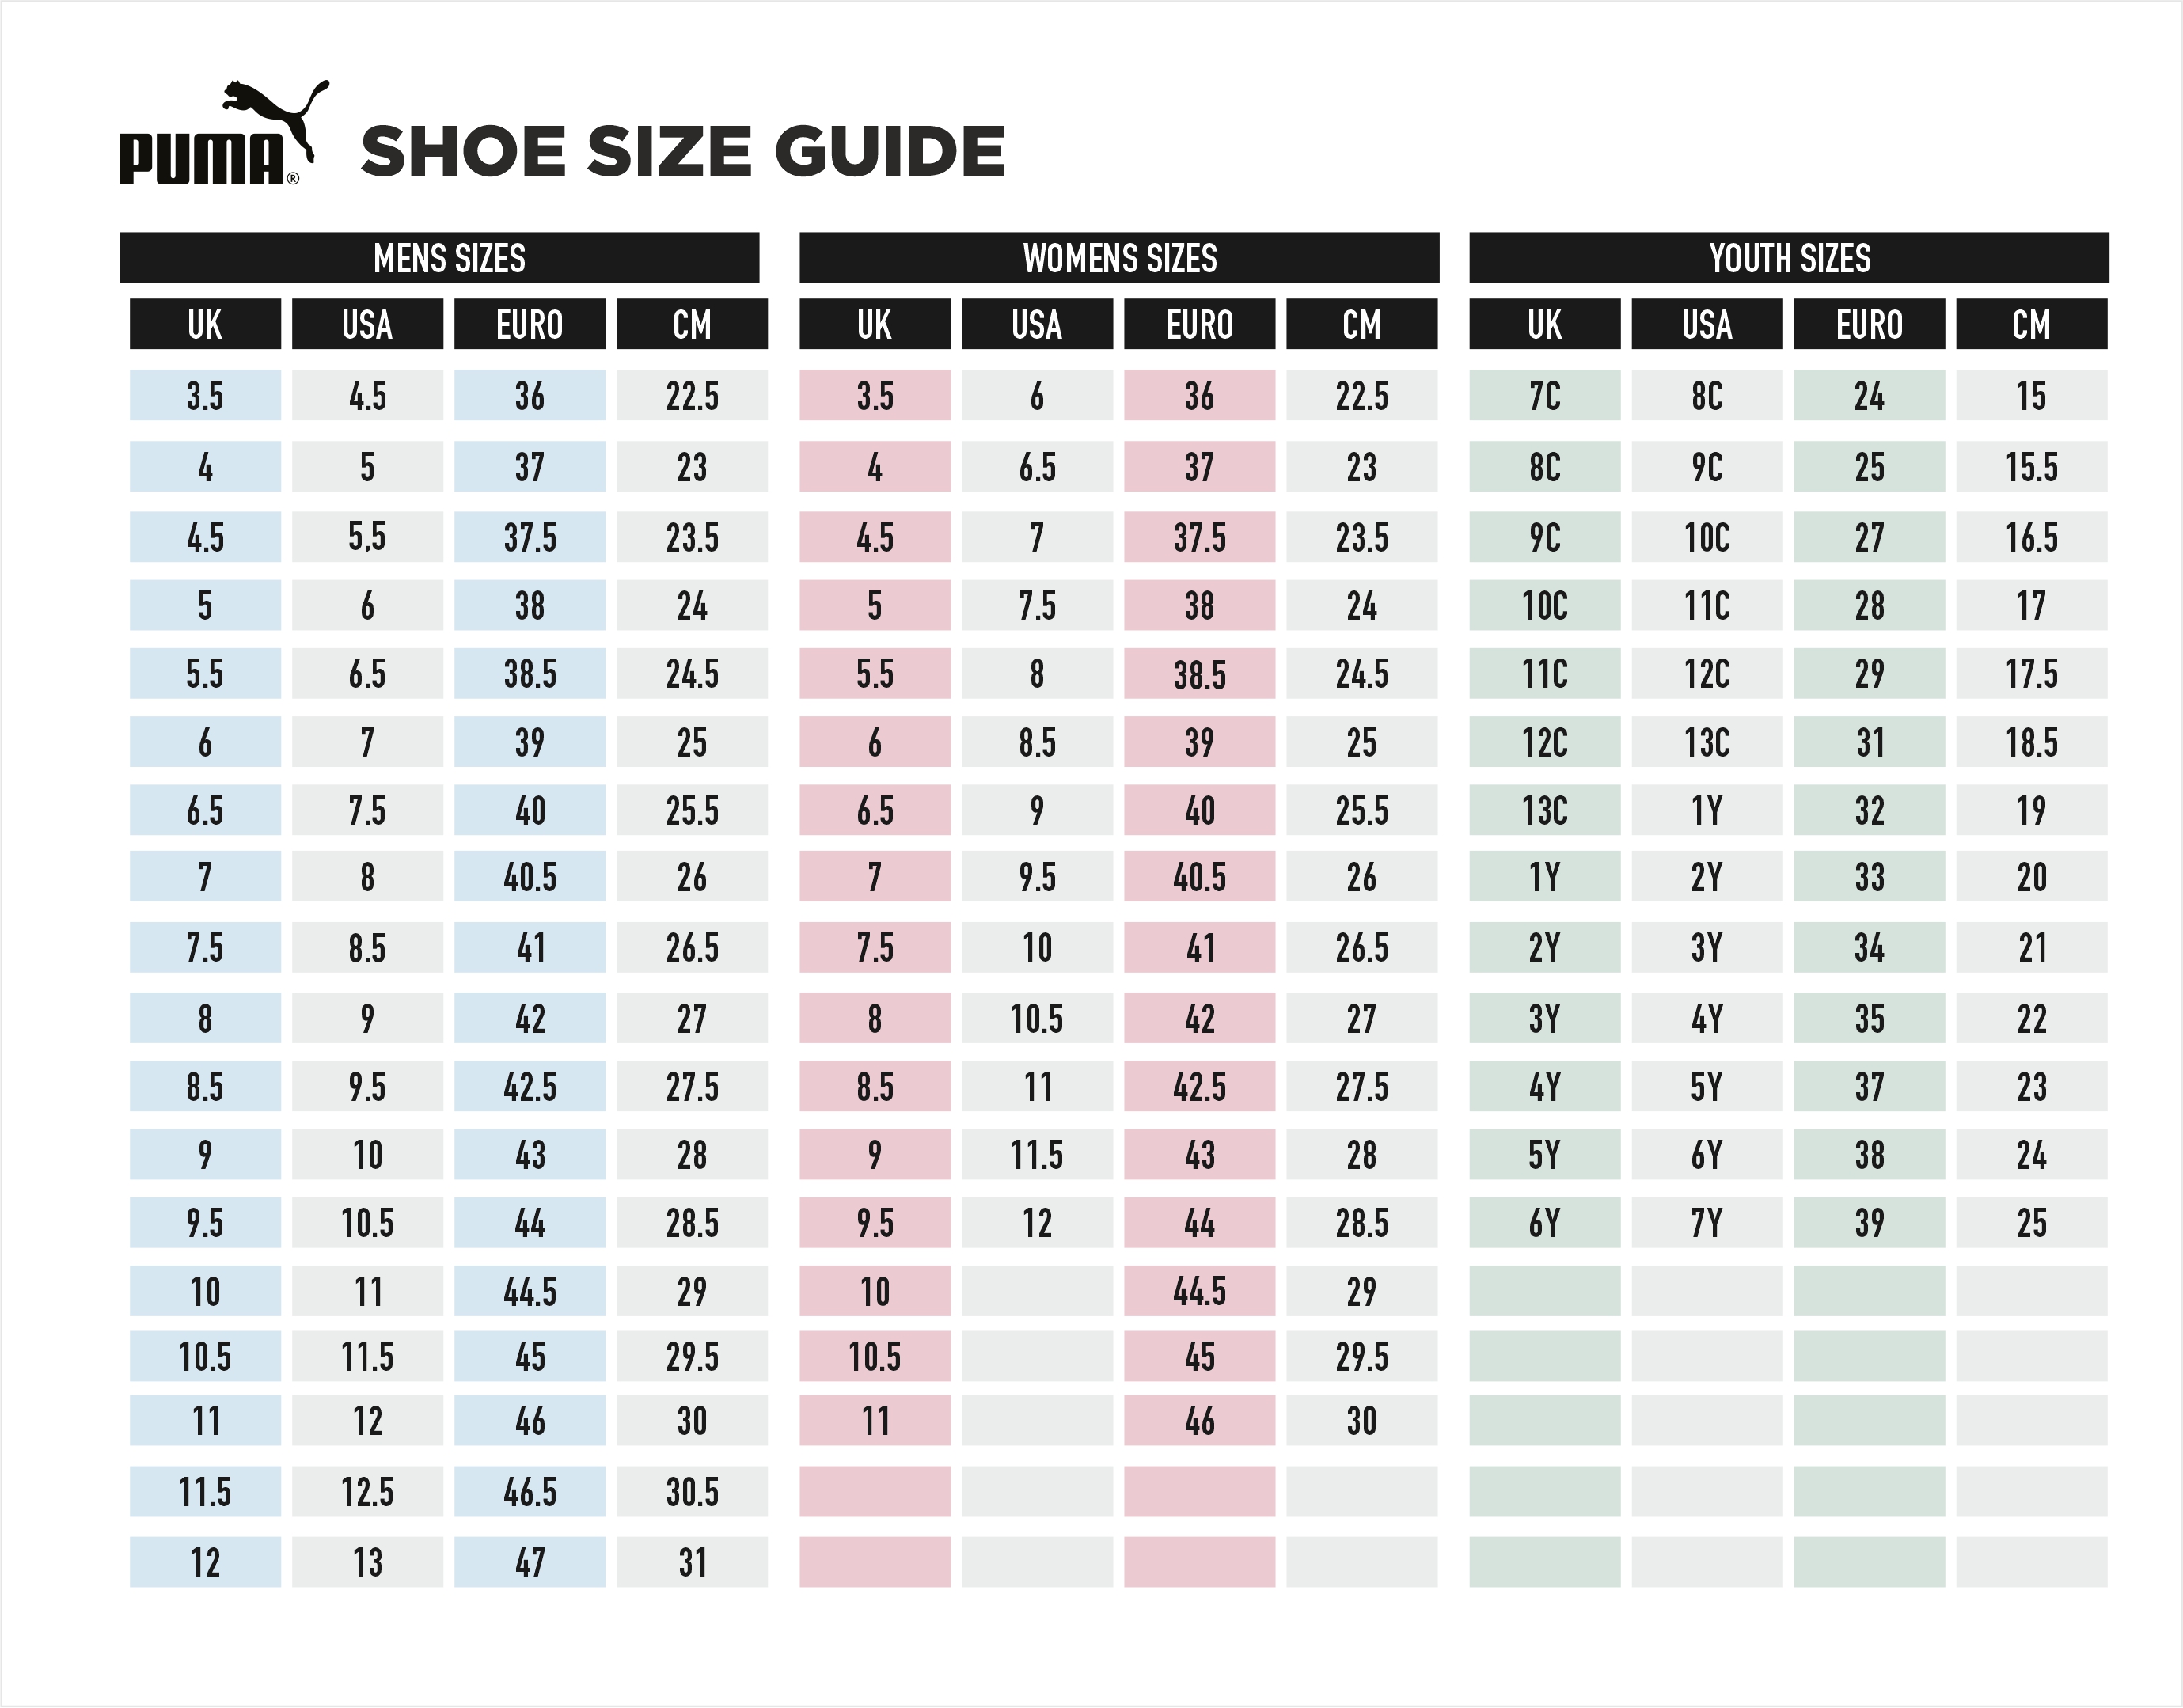 Shoe Size Guides at Intersport Elverys - Elverys